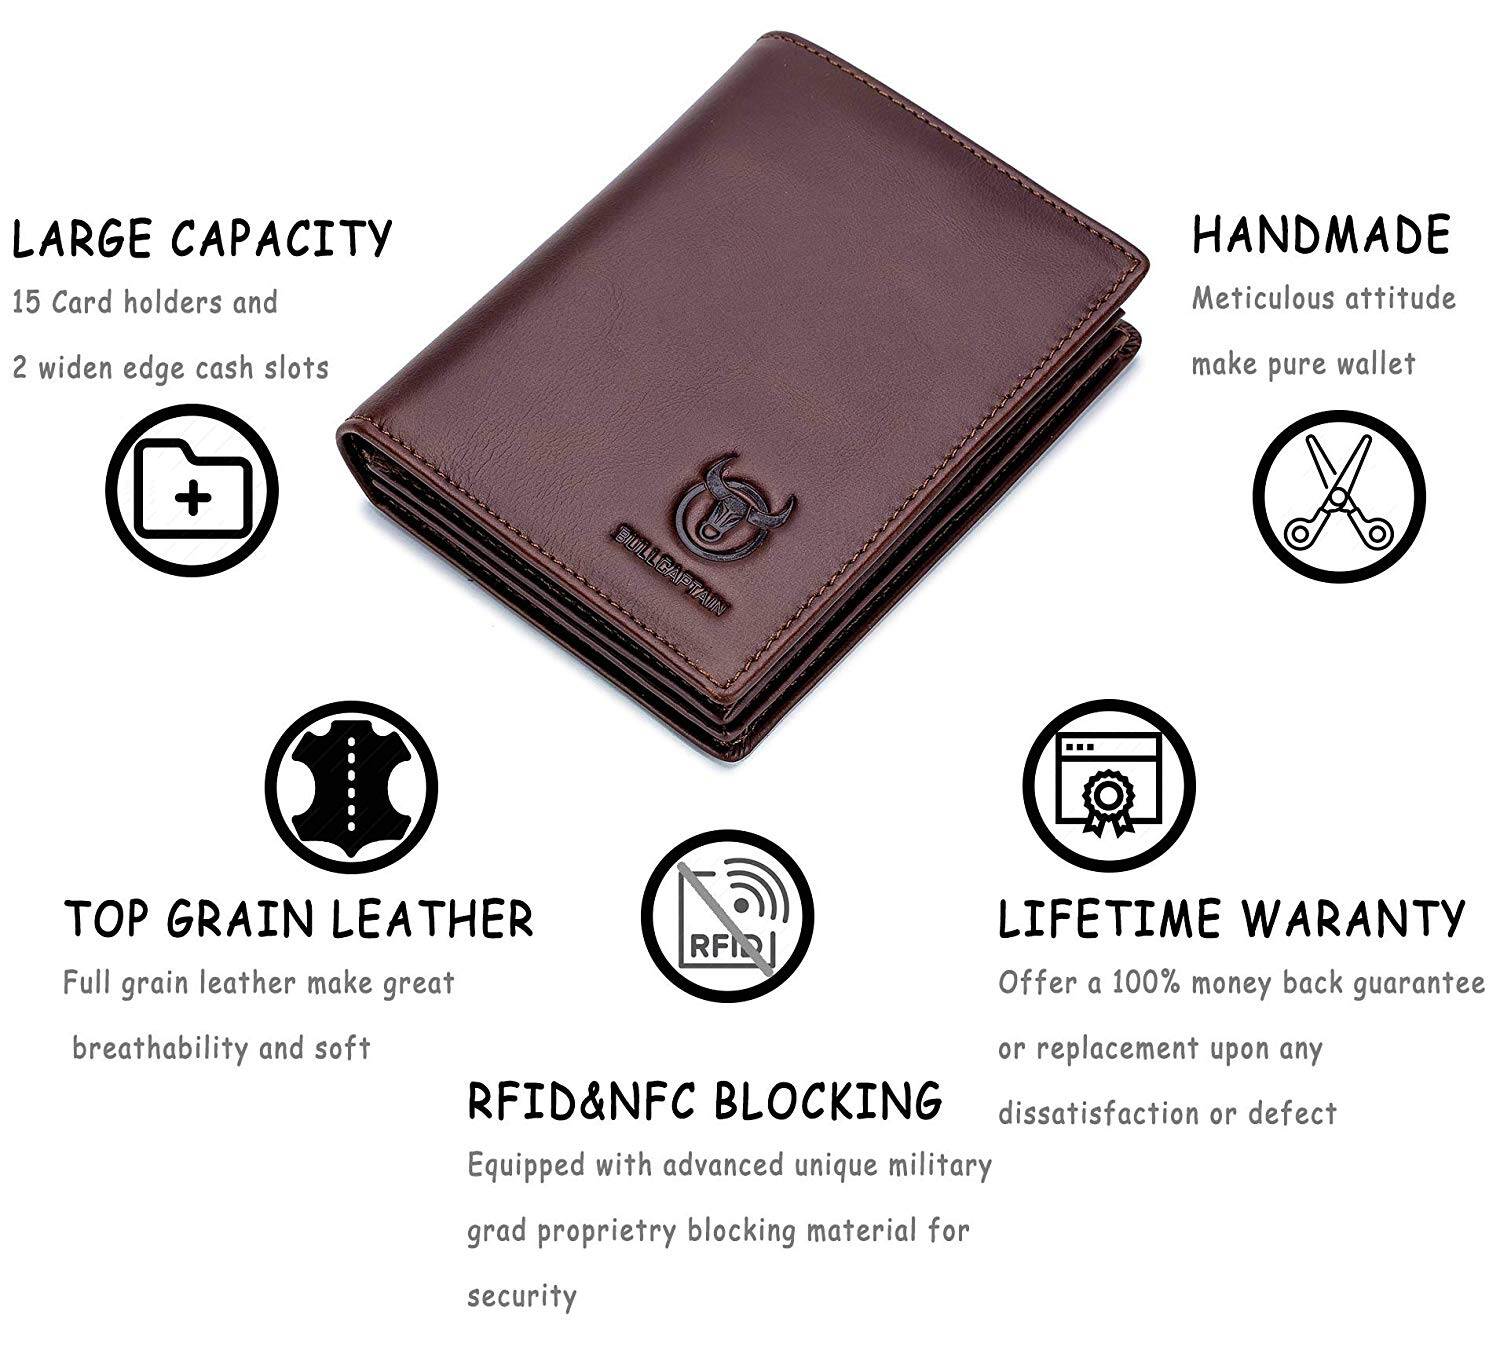 WildHorn Leather Wallet for Men I Top Grain Leather I RFID Protected I 11 Card Slots I 2 Transparent ID Windows I 1 Zipper Compartment